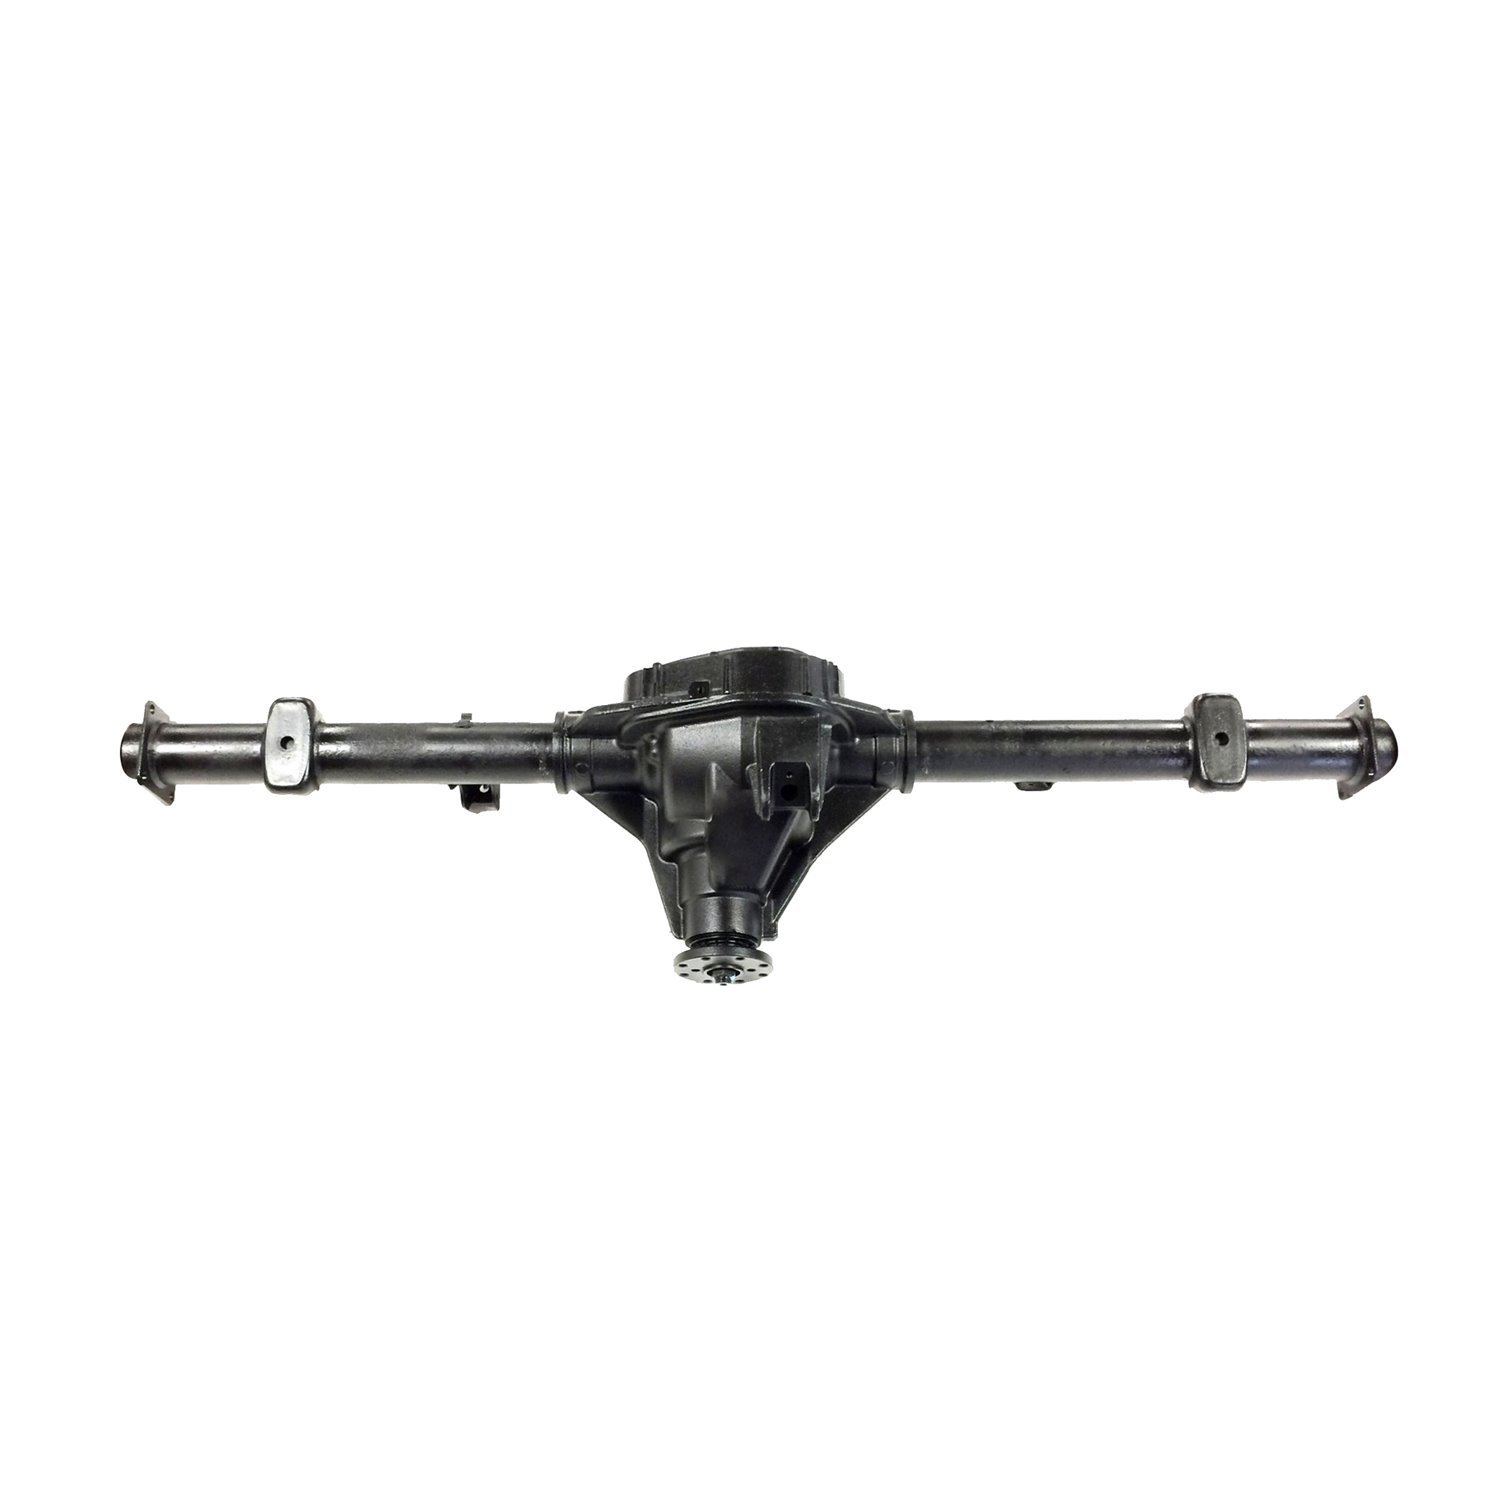 Remanufactured Complete Axle Assembly for Ford 9.75" 02-03 Ford E150 3.55 Ratio Drum